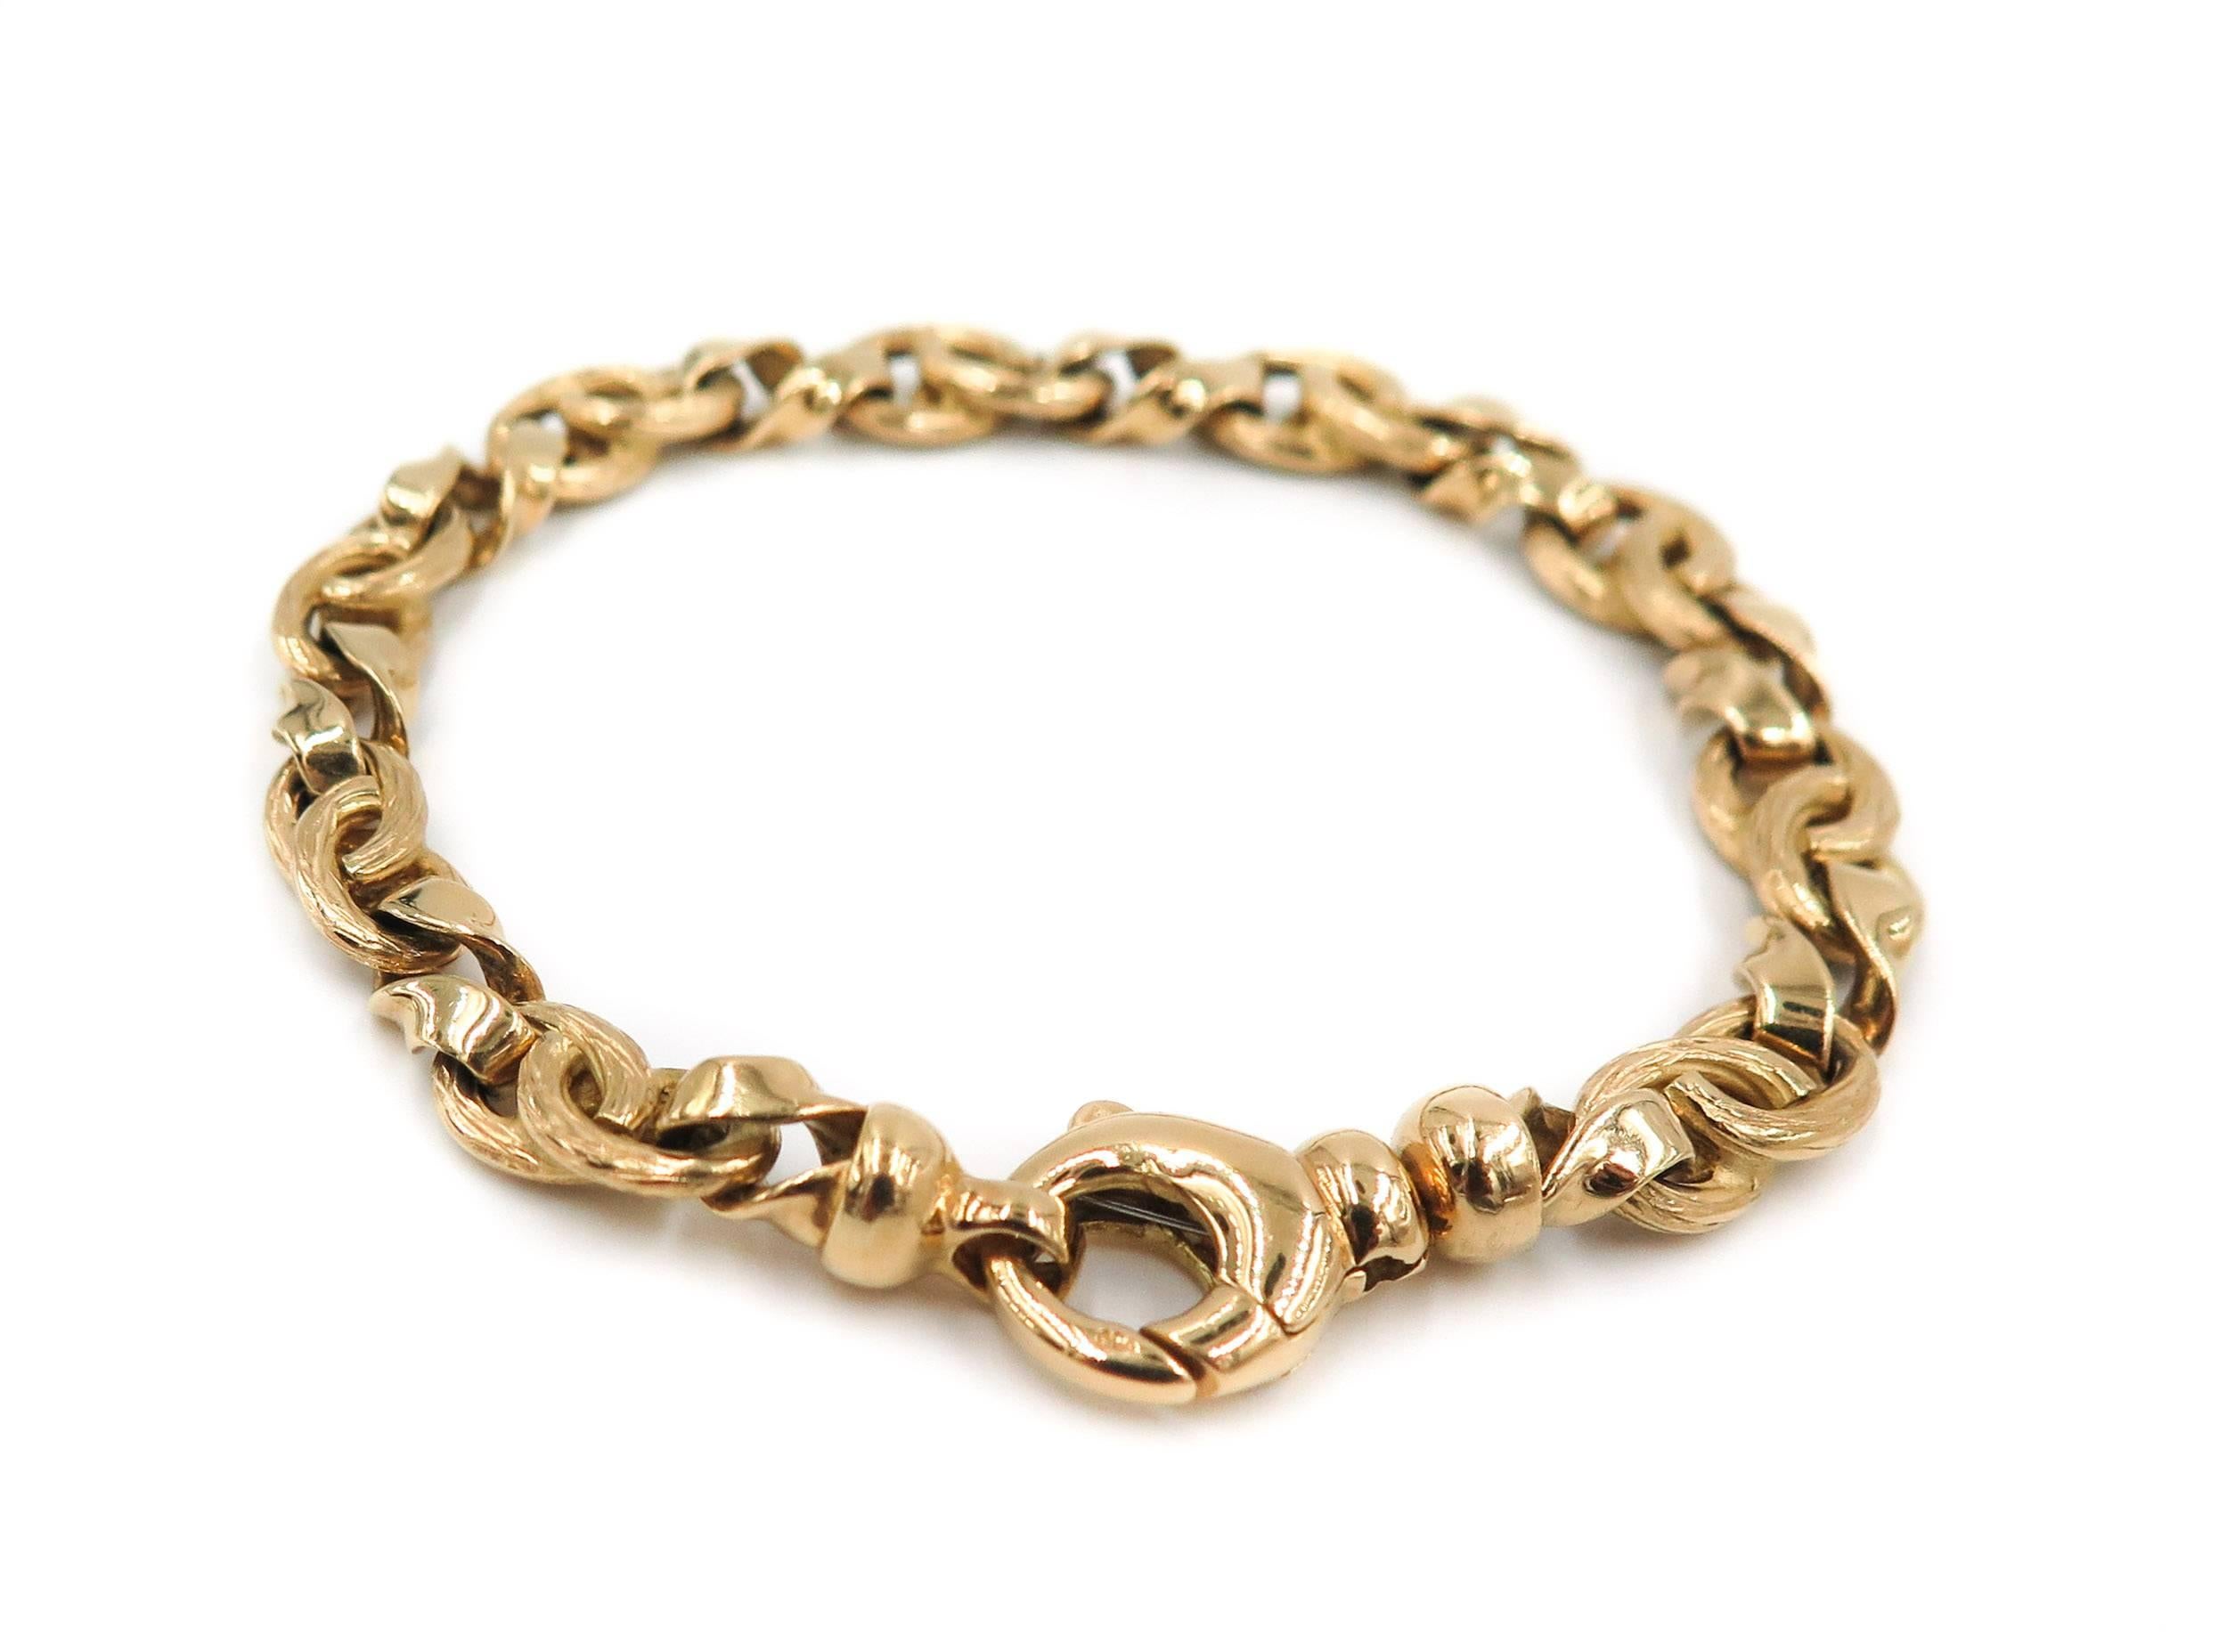 Bold... gold bracelet. Brushed and textured alternating with polished and shiny twisted links. 7.25 inches long and weights 30.10 grams.
